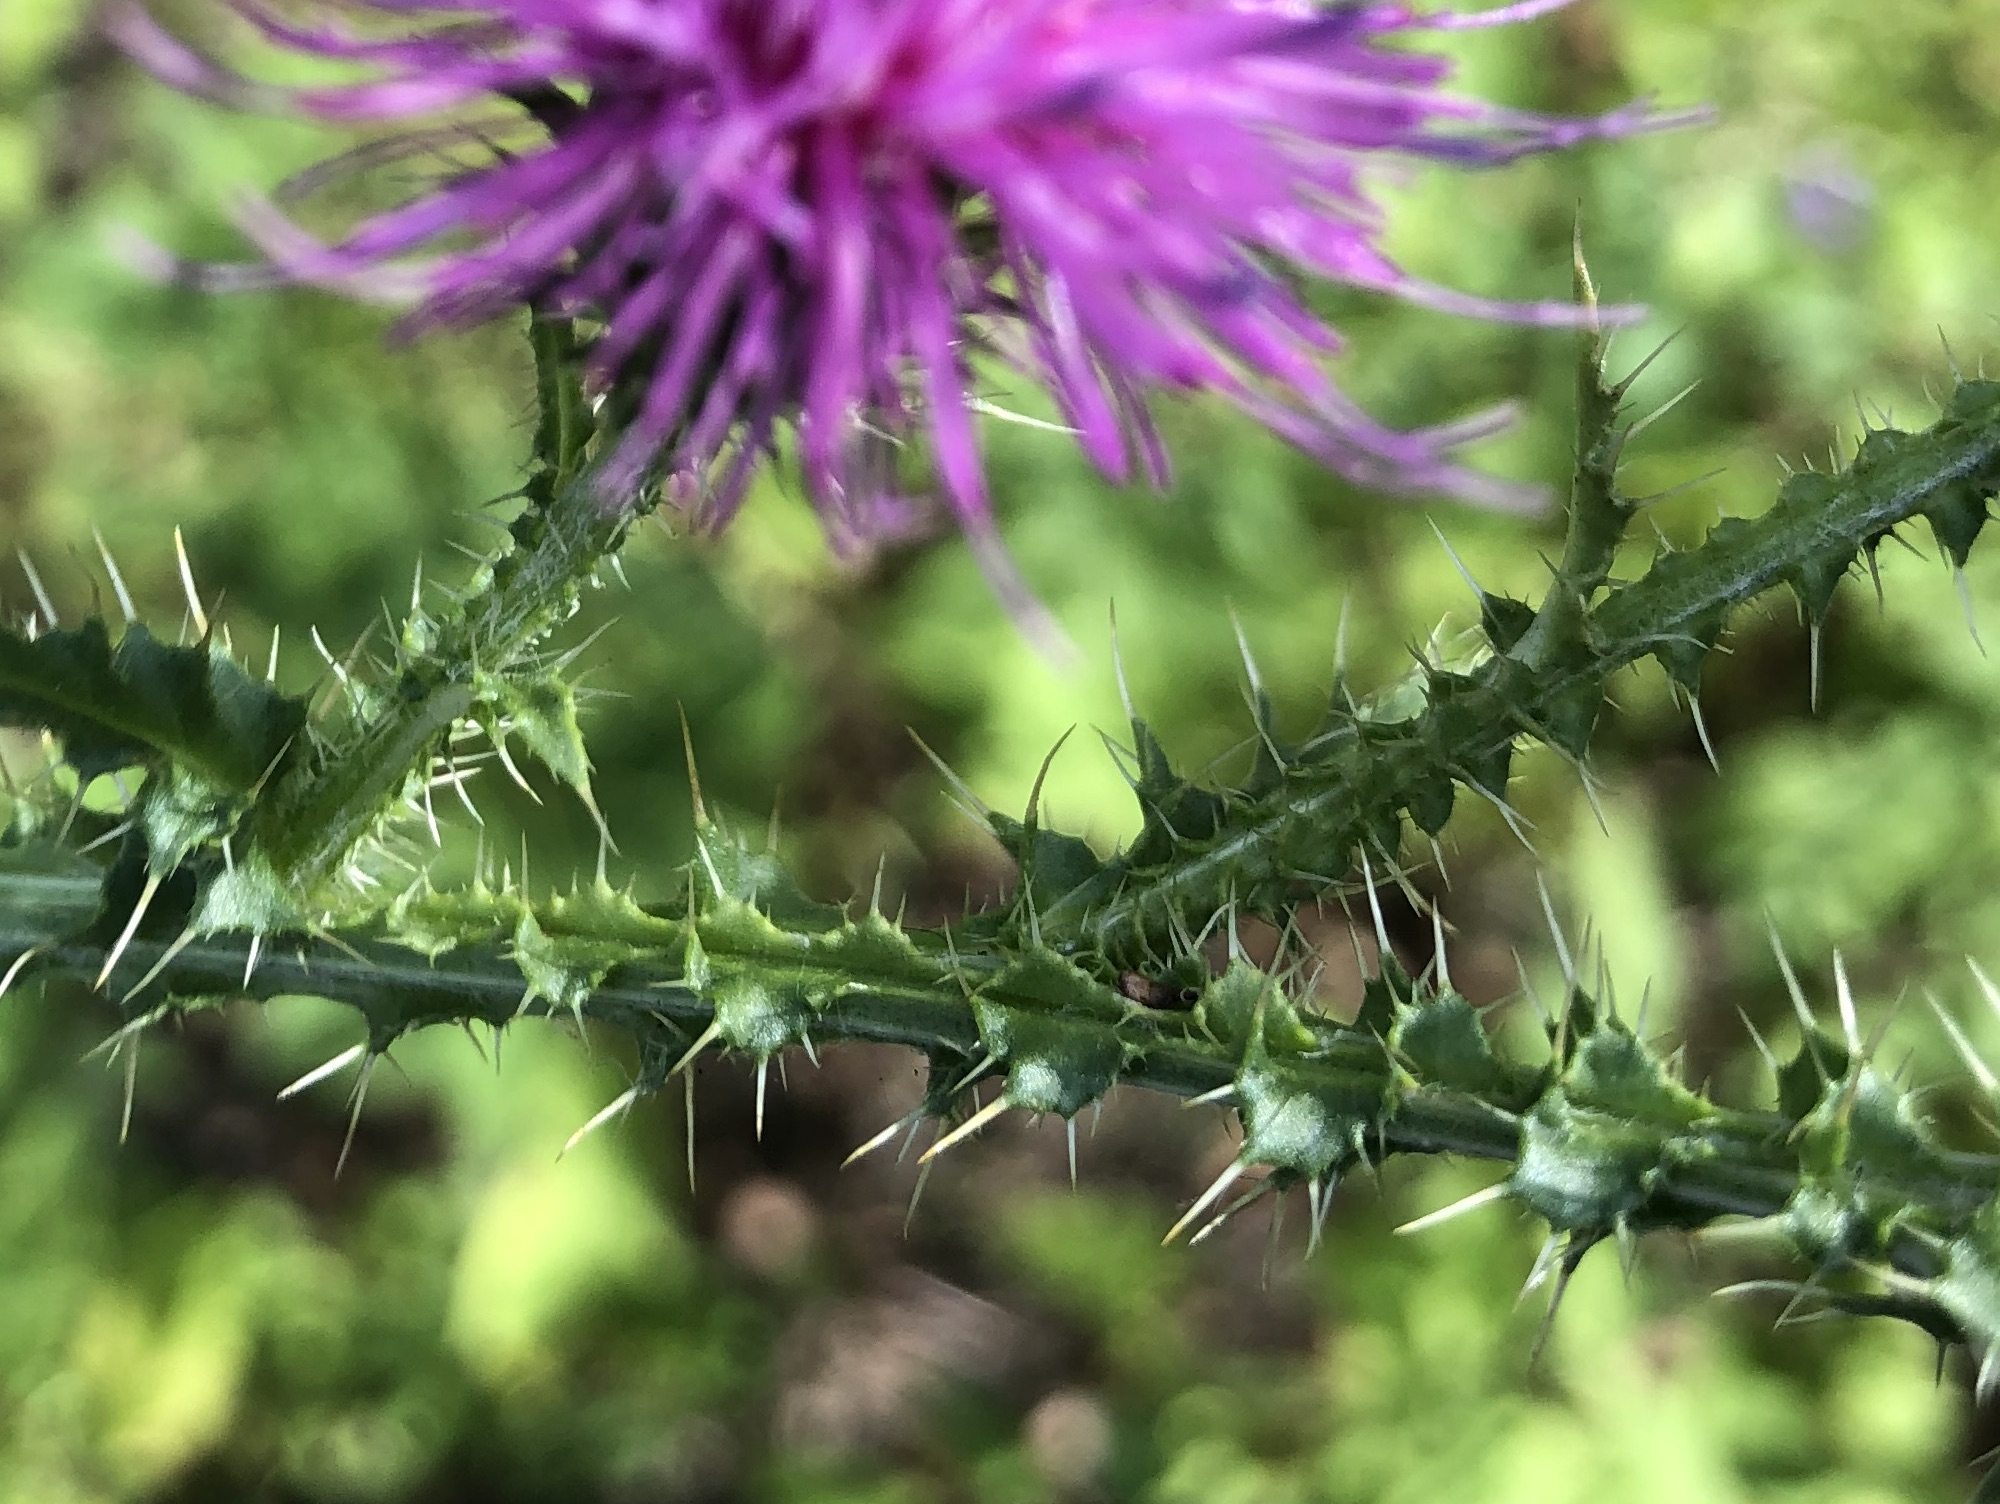 Plumeless Thistle stem between sidewalk and curb on Tumalo Trail in Madison, Wisconsin on August 16, 2022.